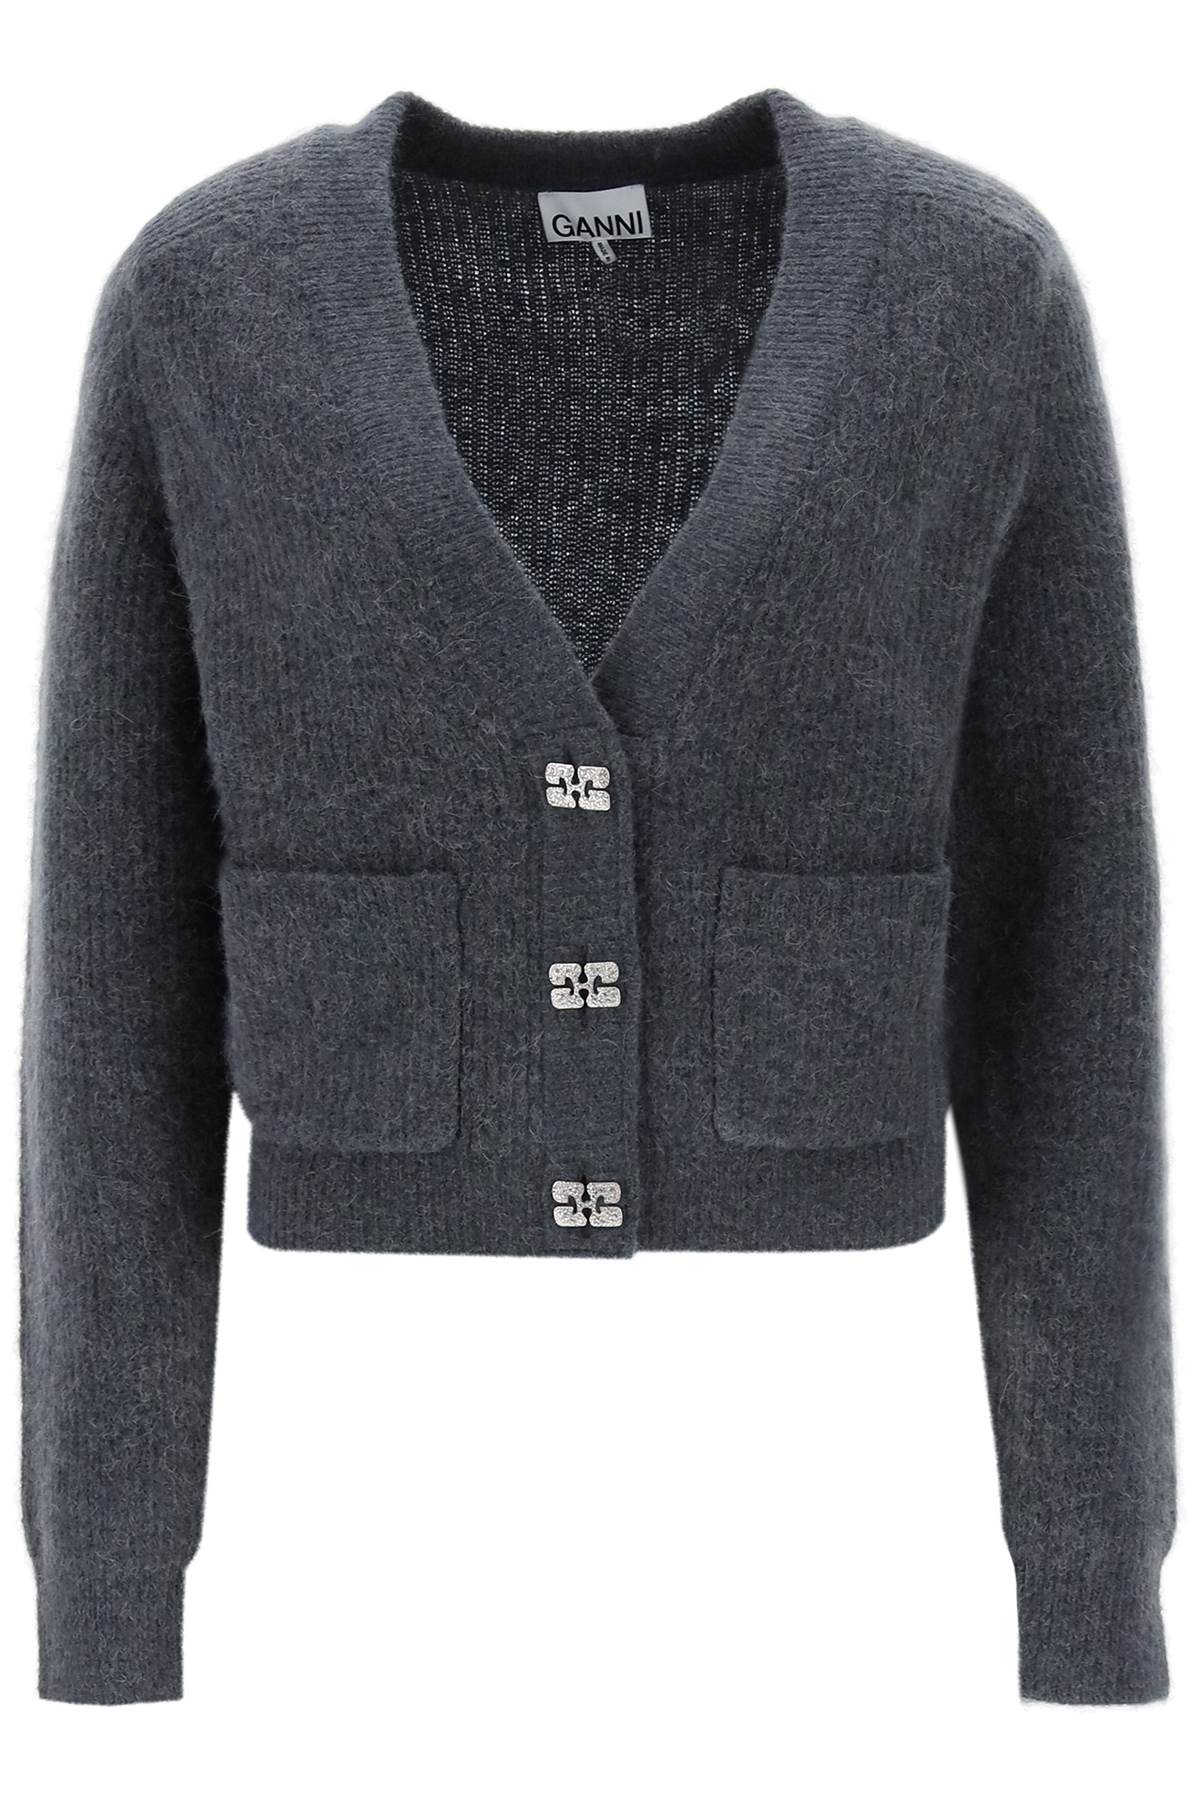 GANNI WOOL CARDIGAN WITH JEWEL BUTTONS